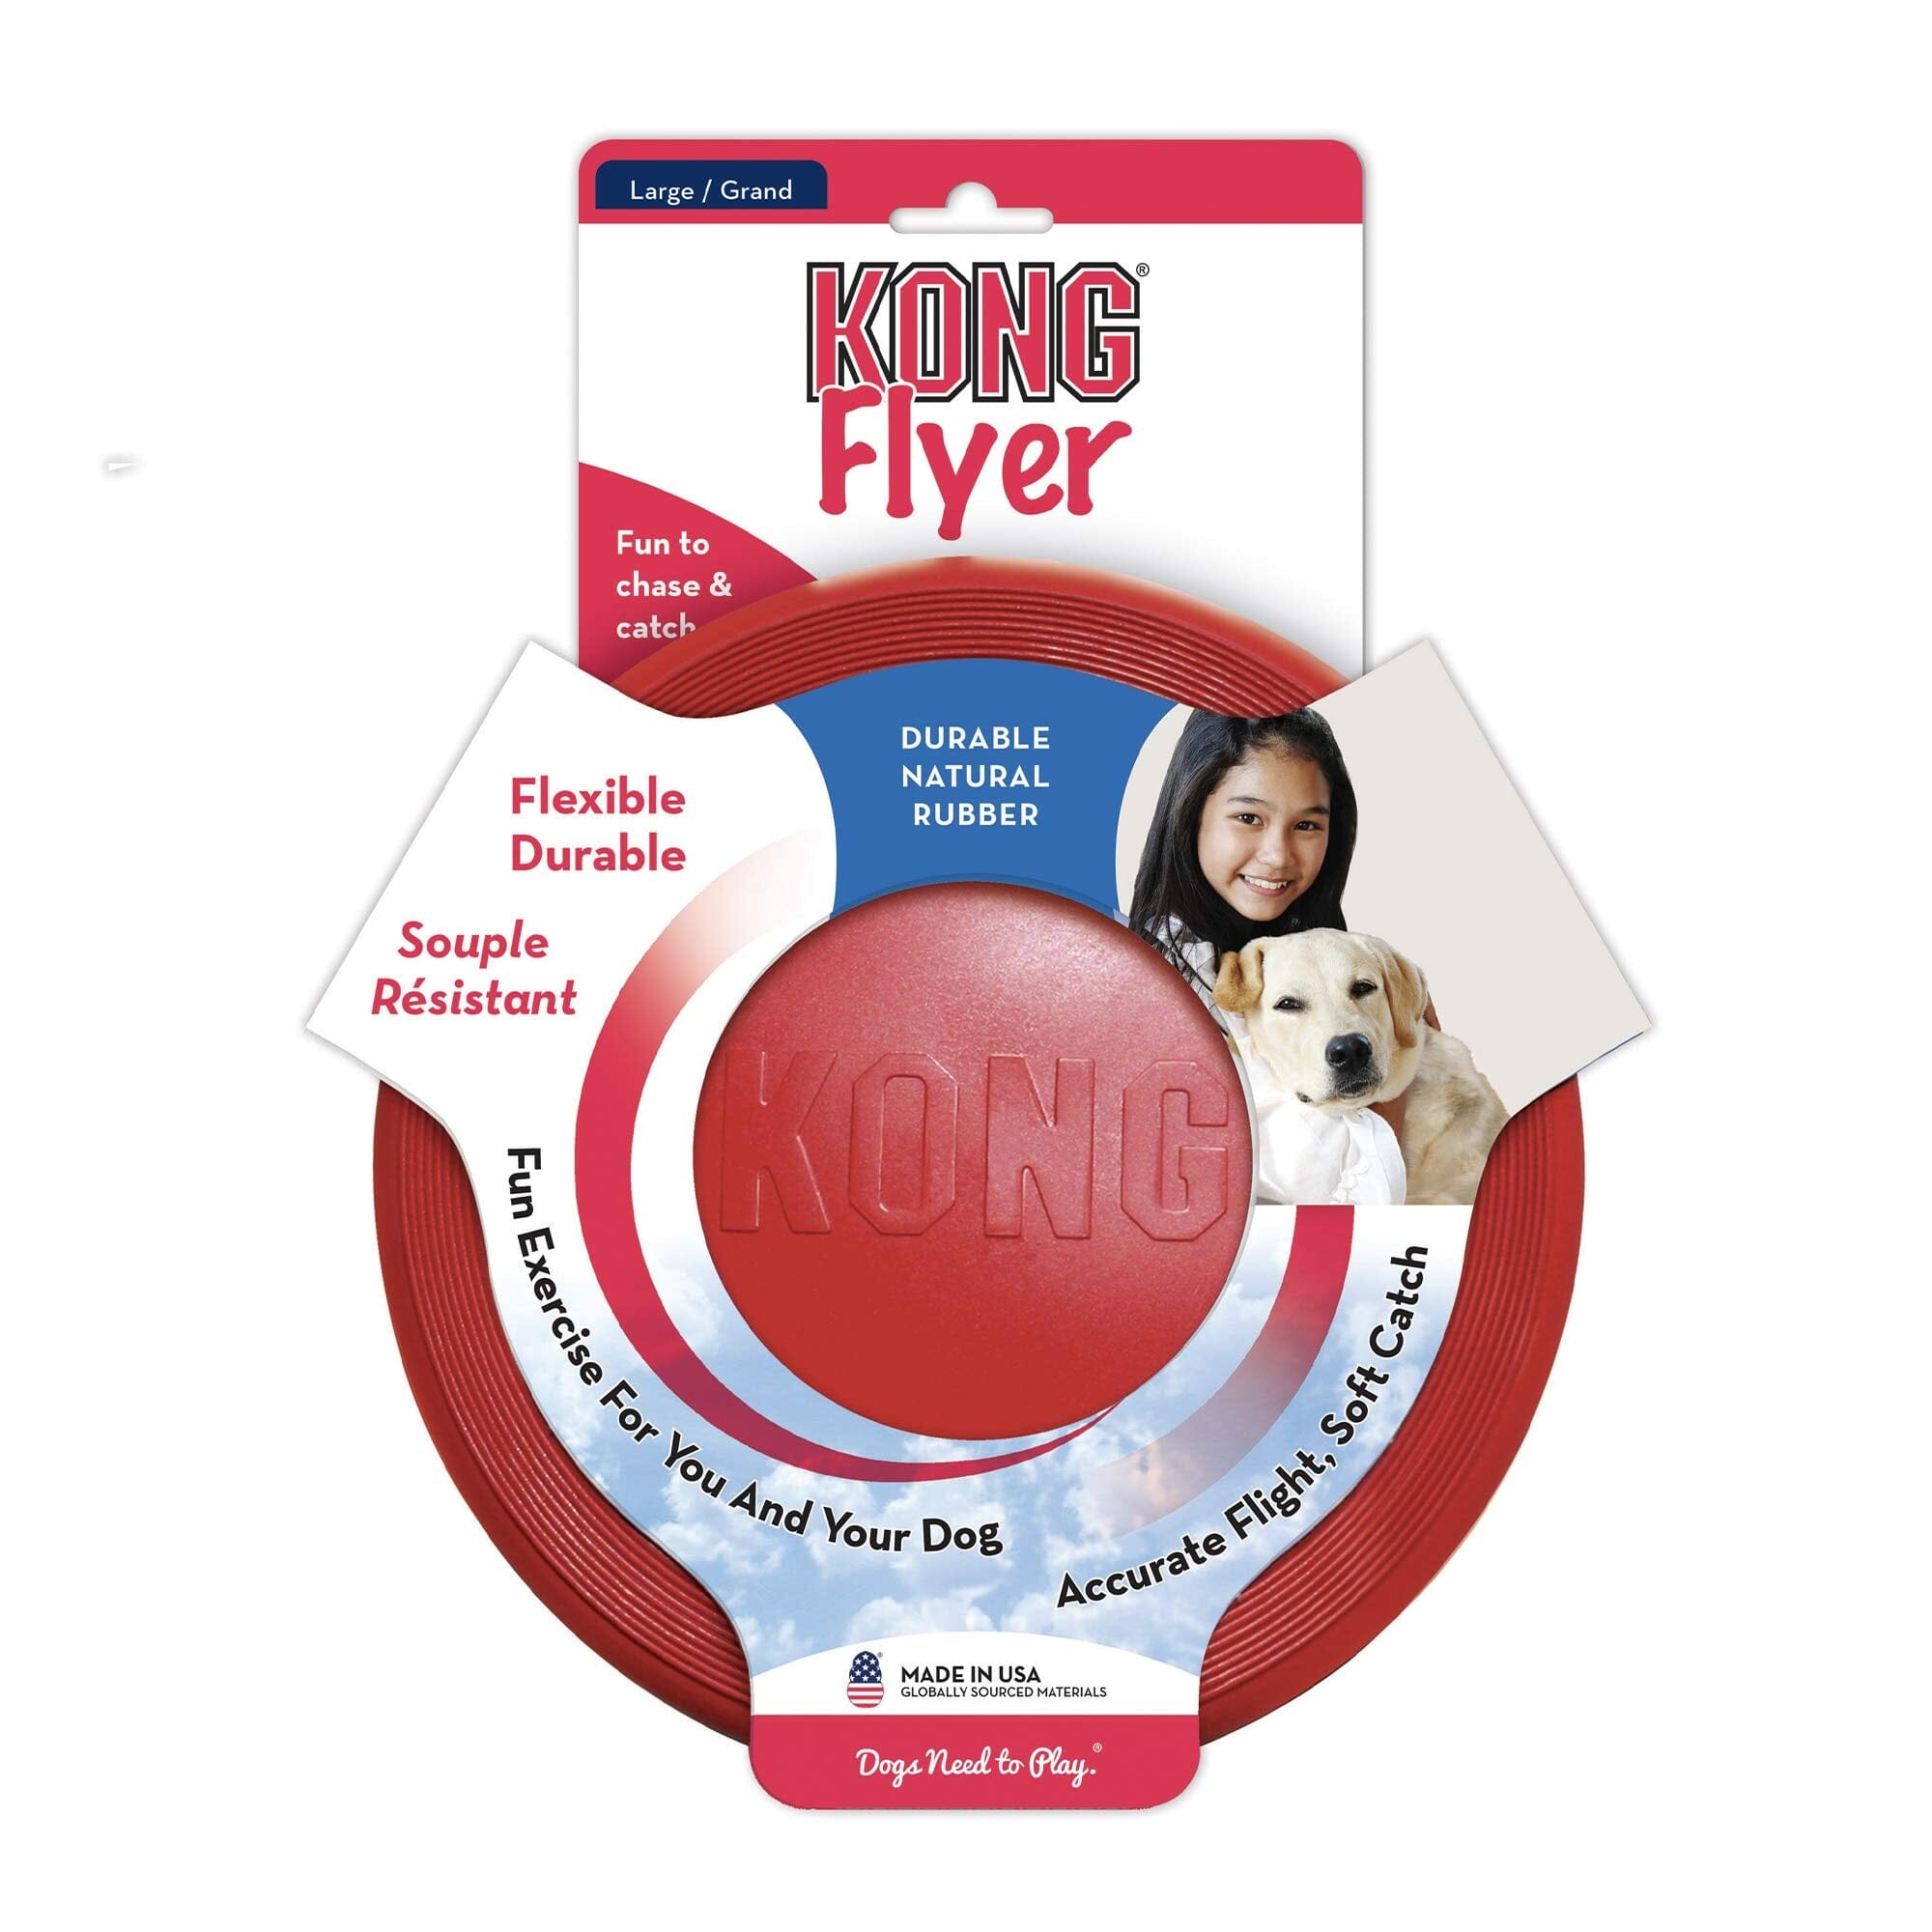 Kong Flyer Soft Flying Disc for Fetch Natural Rubber Dog Toy - Red - Large  